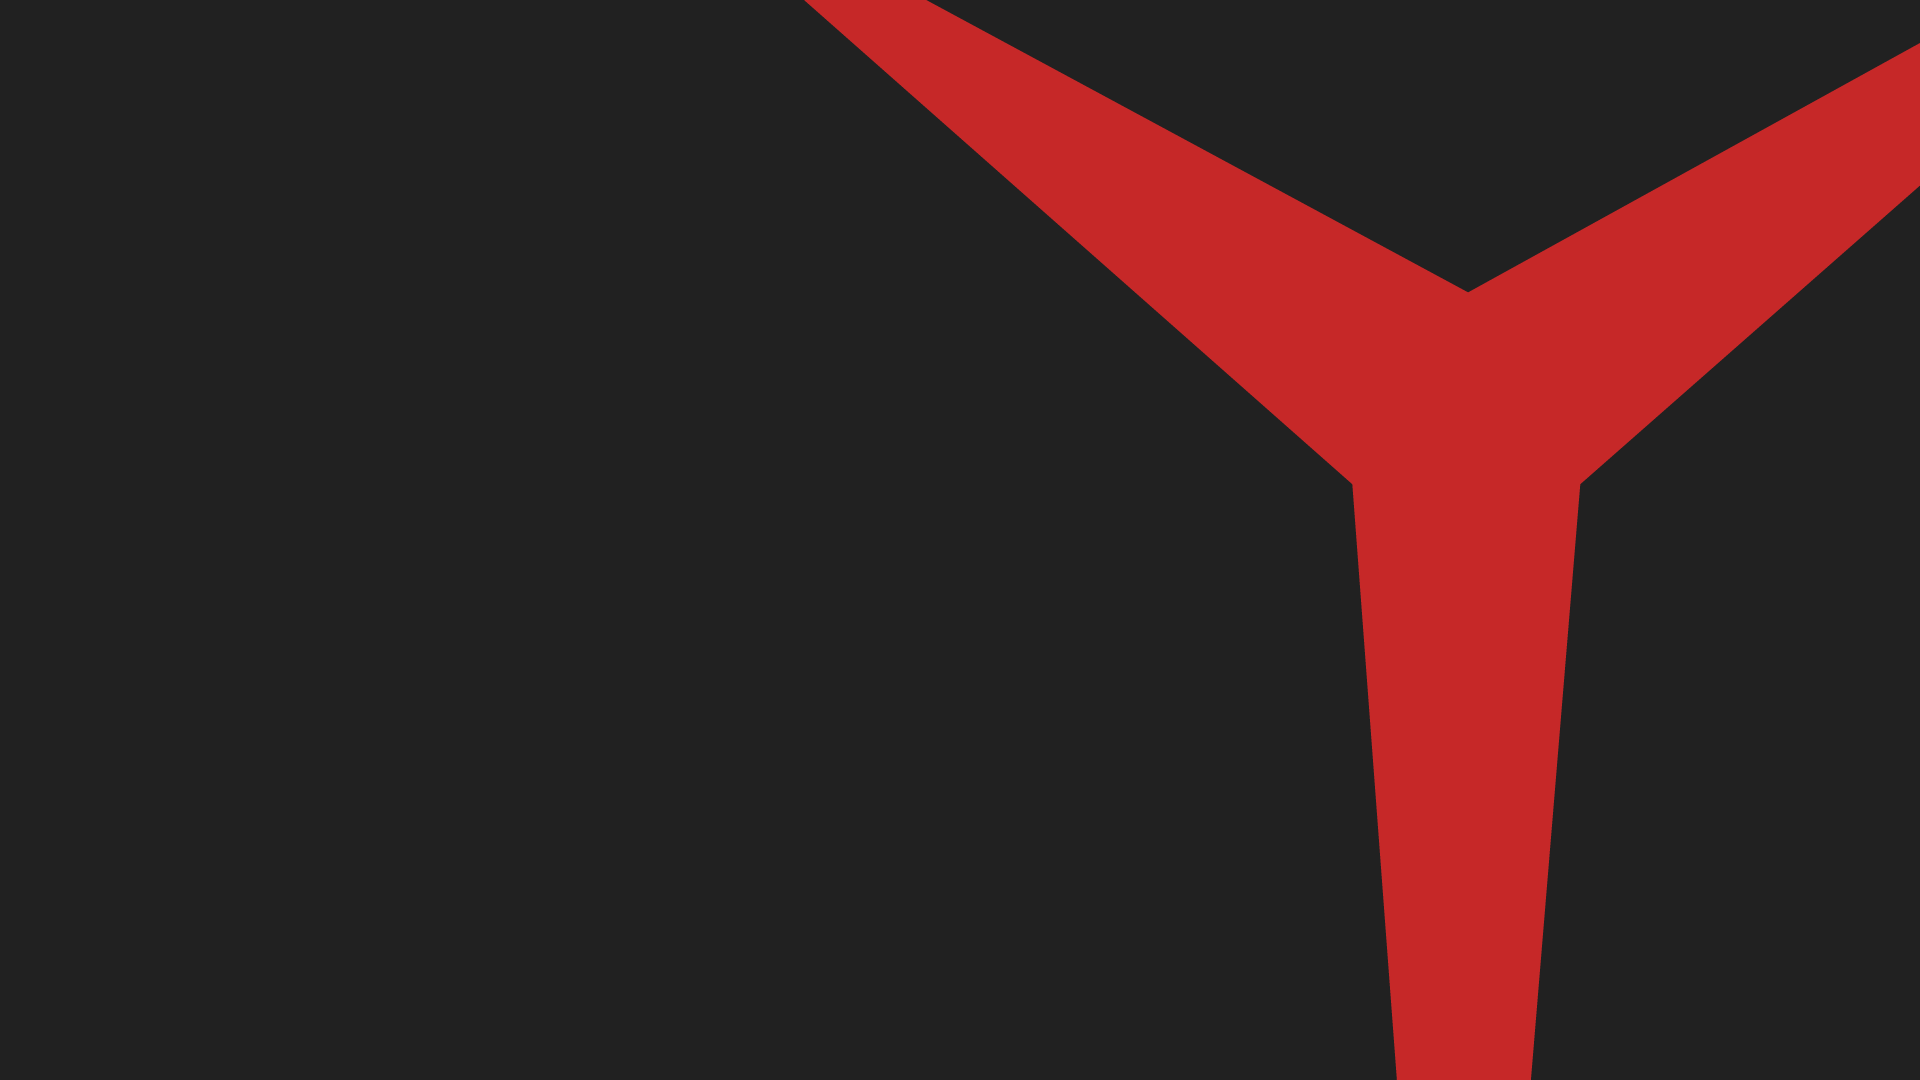 Wallpapers : Lenovo, Legion, minimalism, red, material style